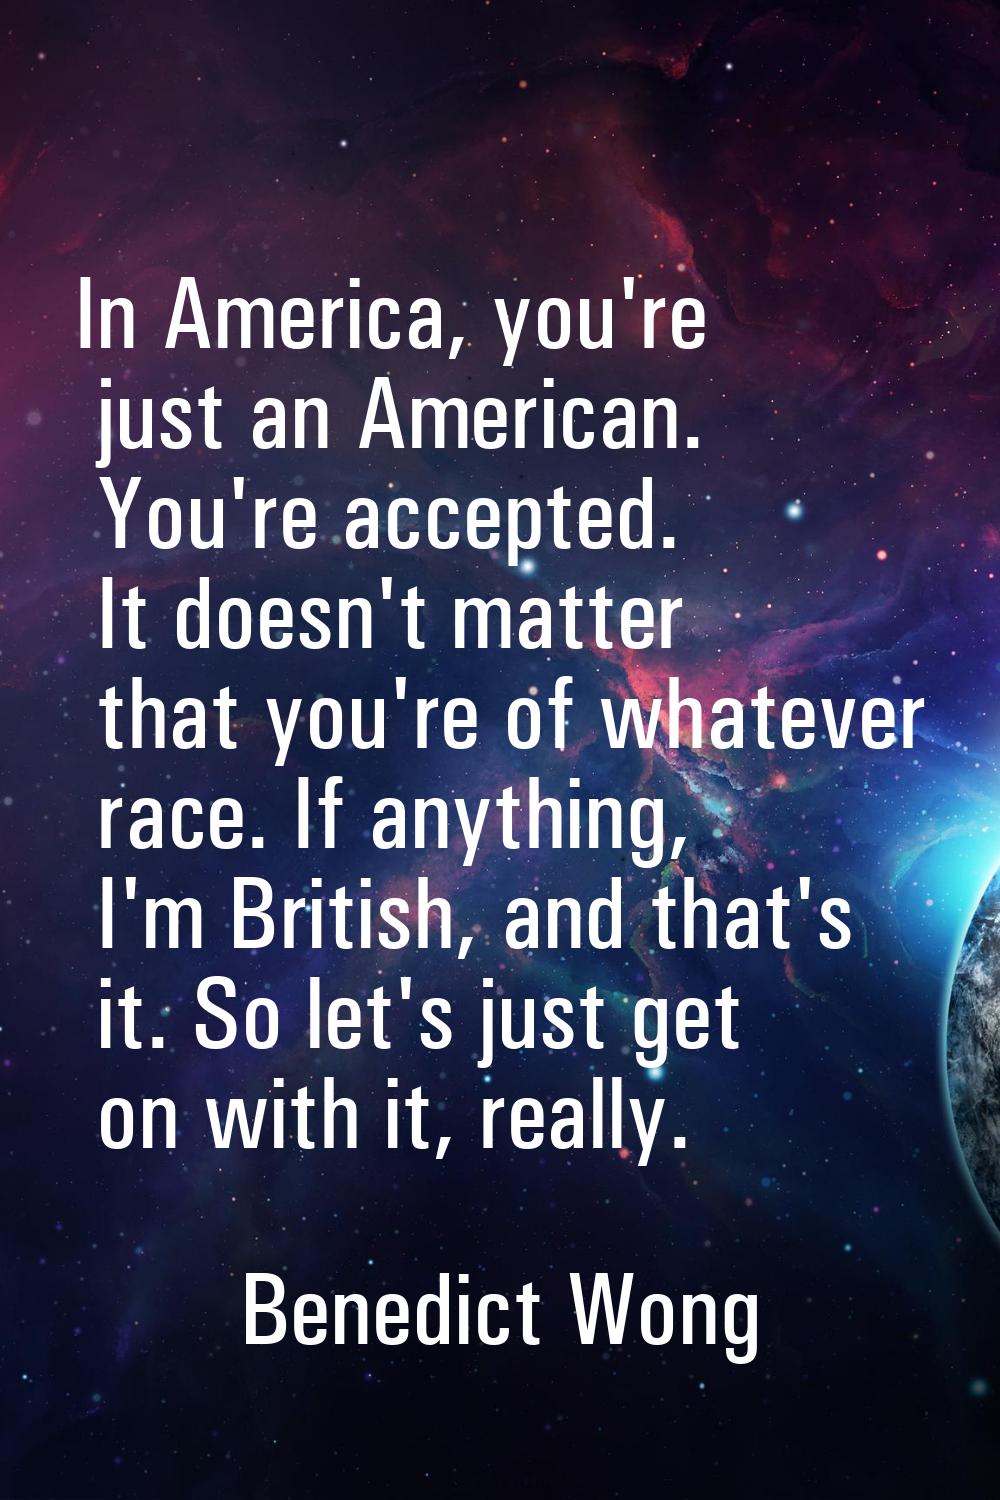 In America, you're just an American. You're accepted. It doesn't matter that you're of whatever rac